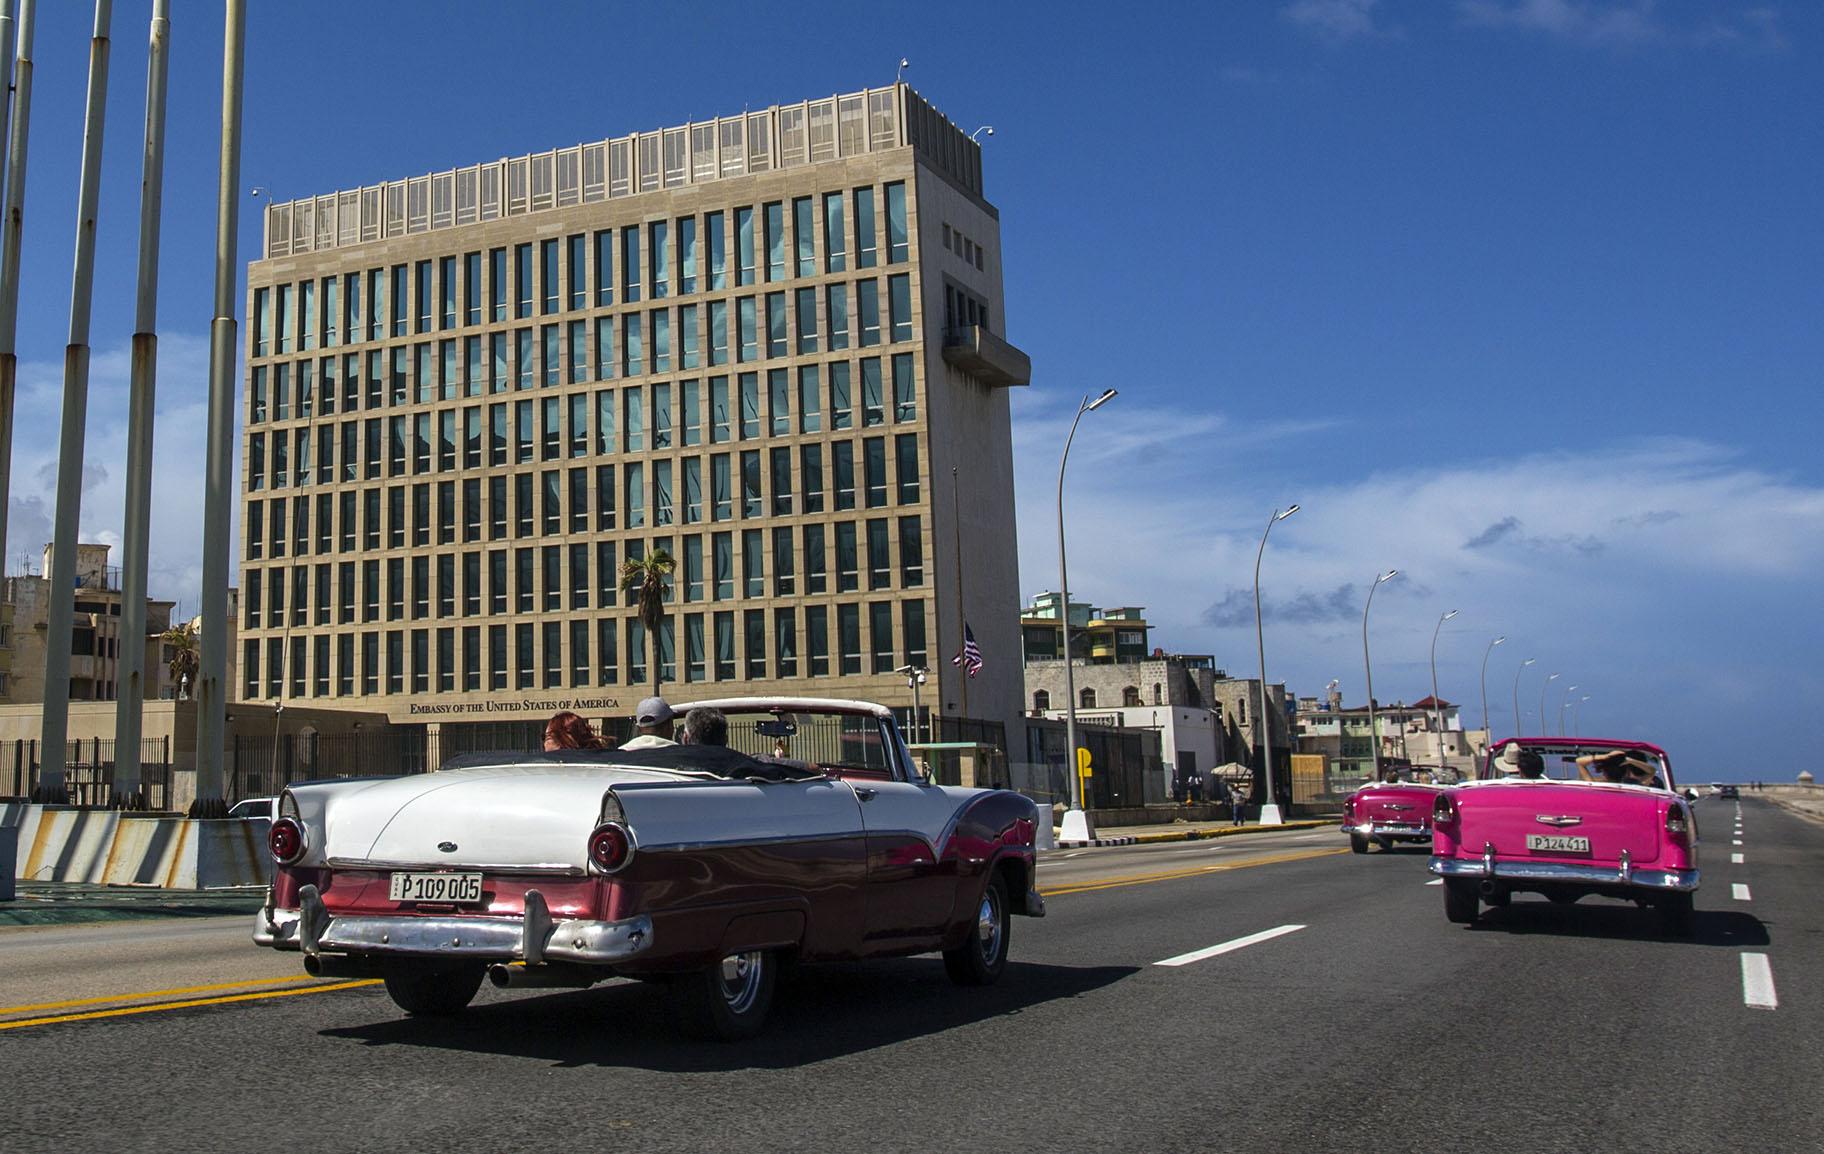 In this Oct. 3, 2017, file photo, tourists ride classic convertible cars on the Malecon beside the United States Embassy in Havana, Cuba. (AP Photo / Desmond Boylan, File)